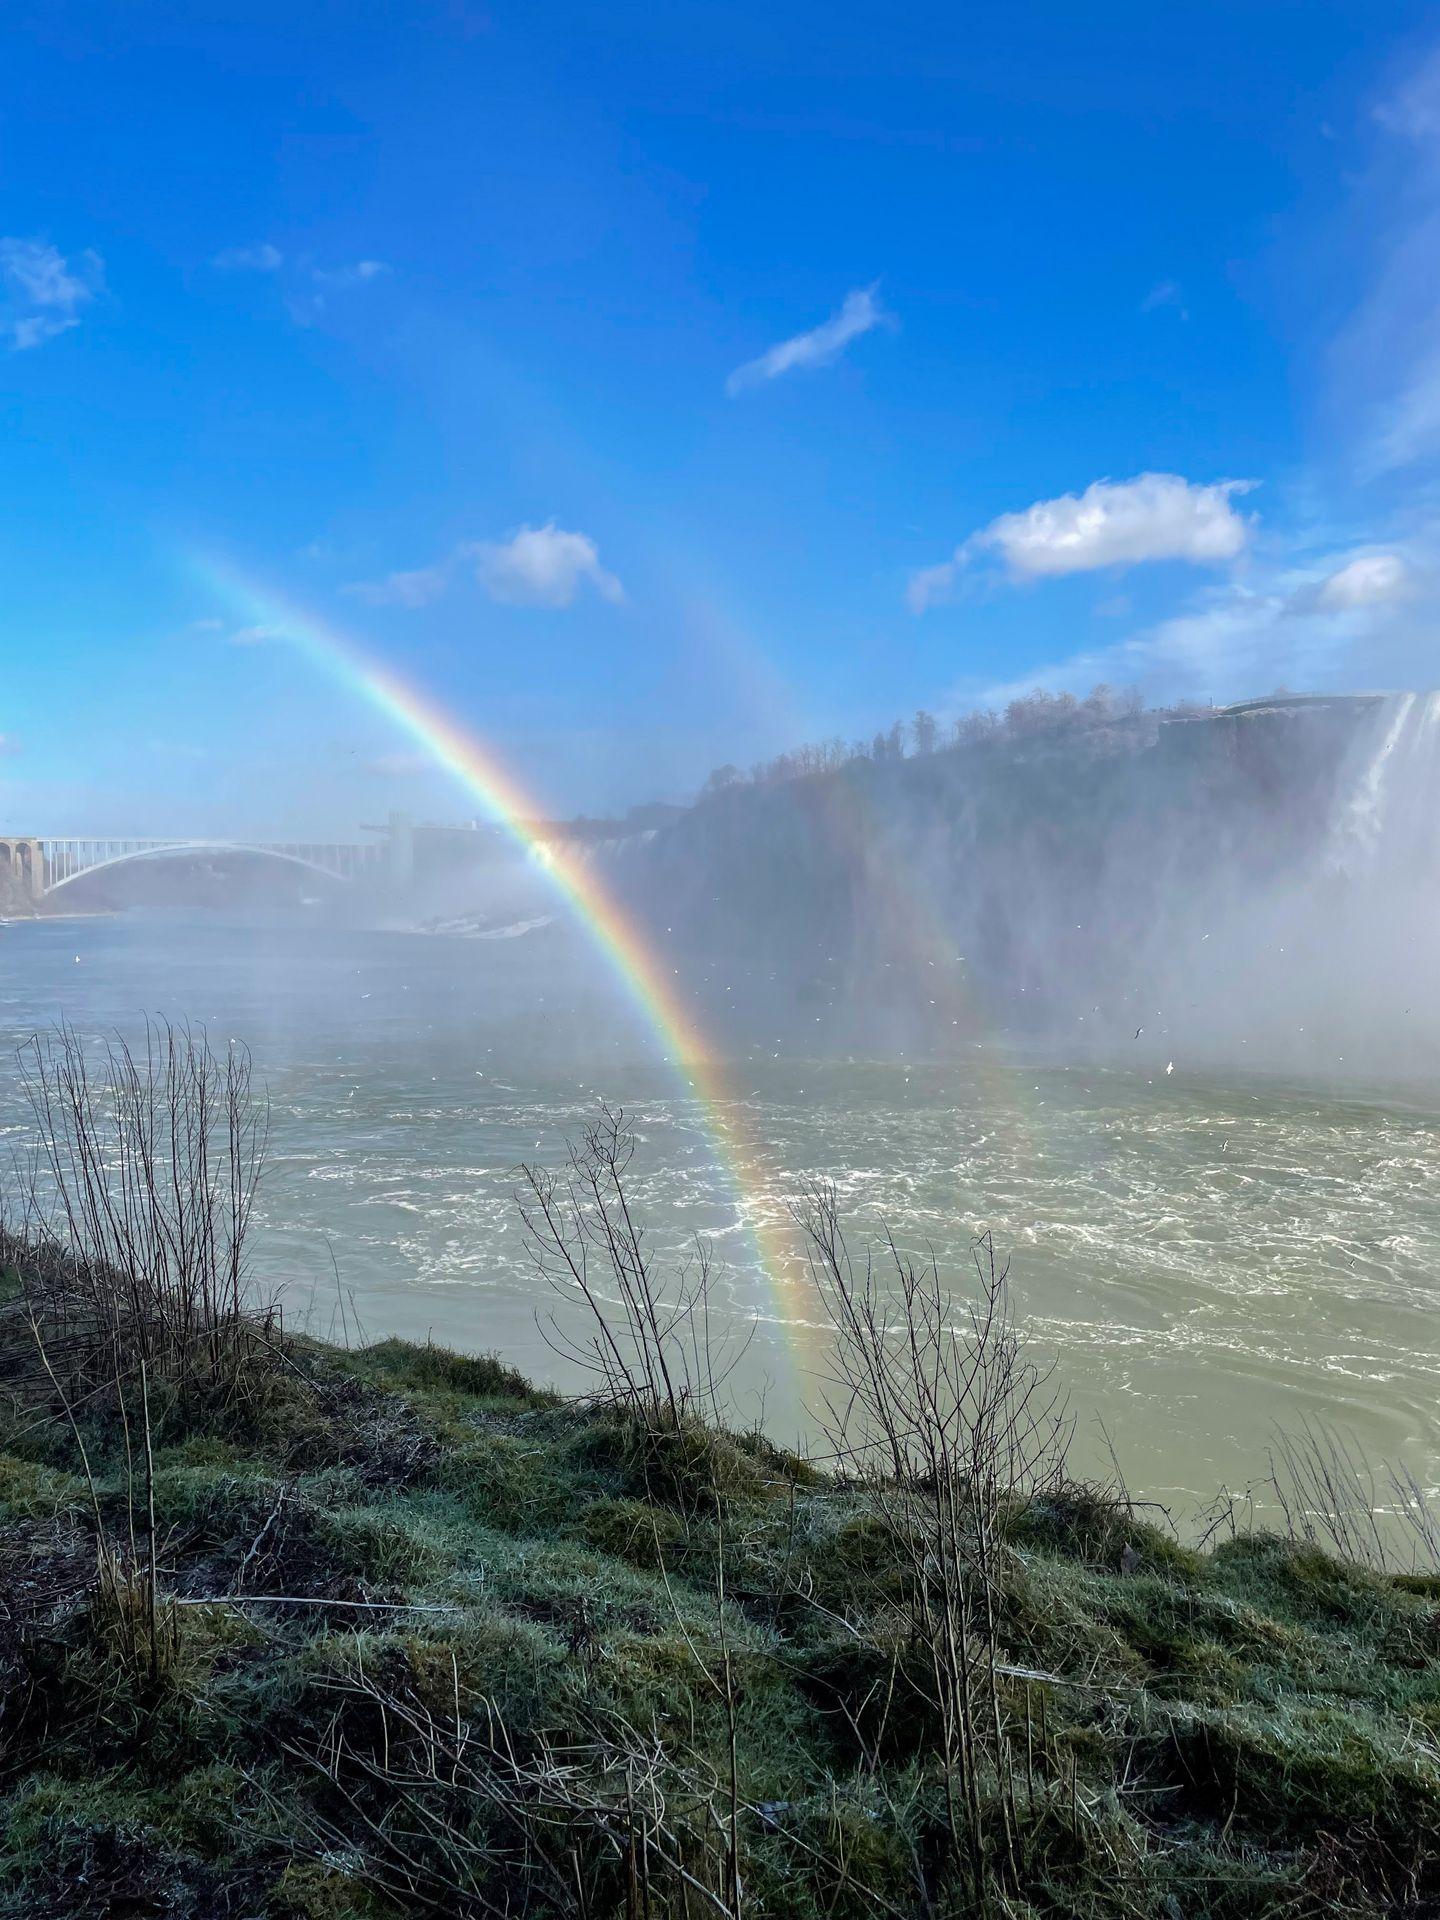 A view of the Niagara River and several rainbows.